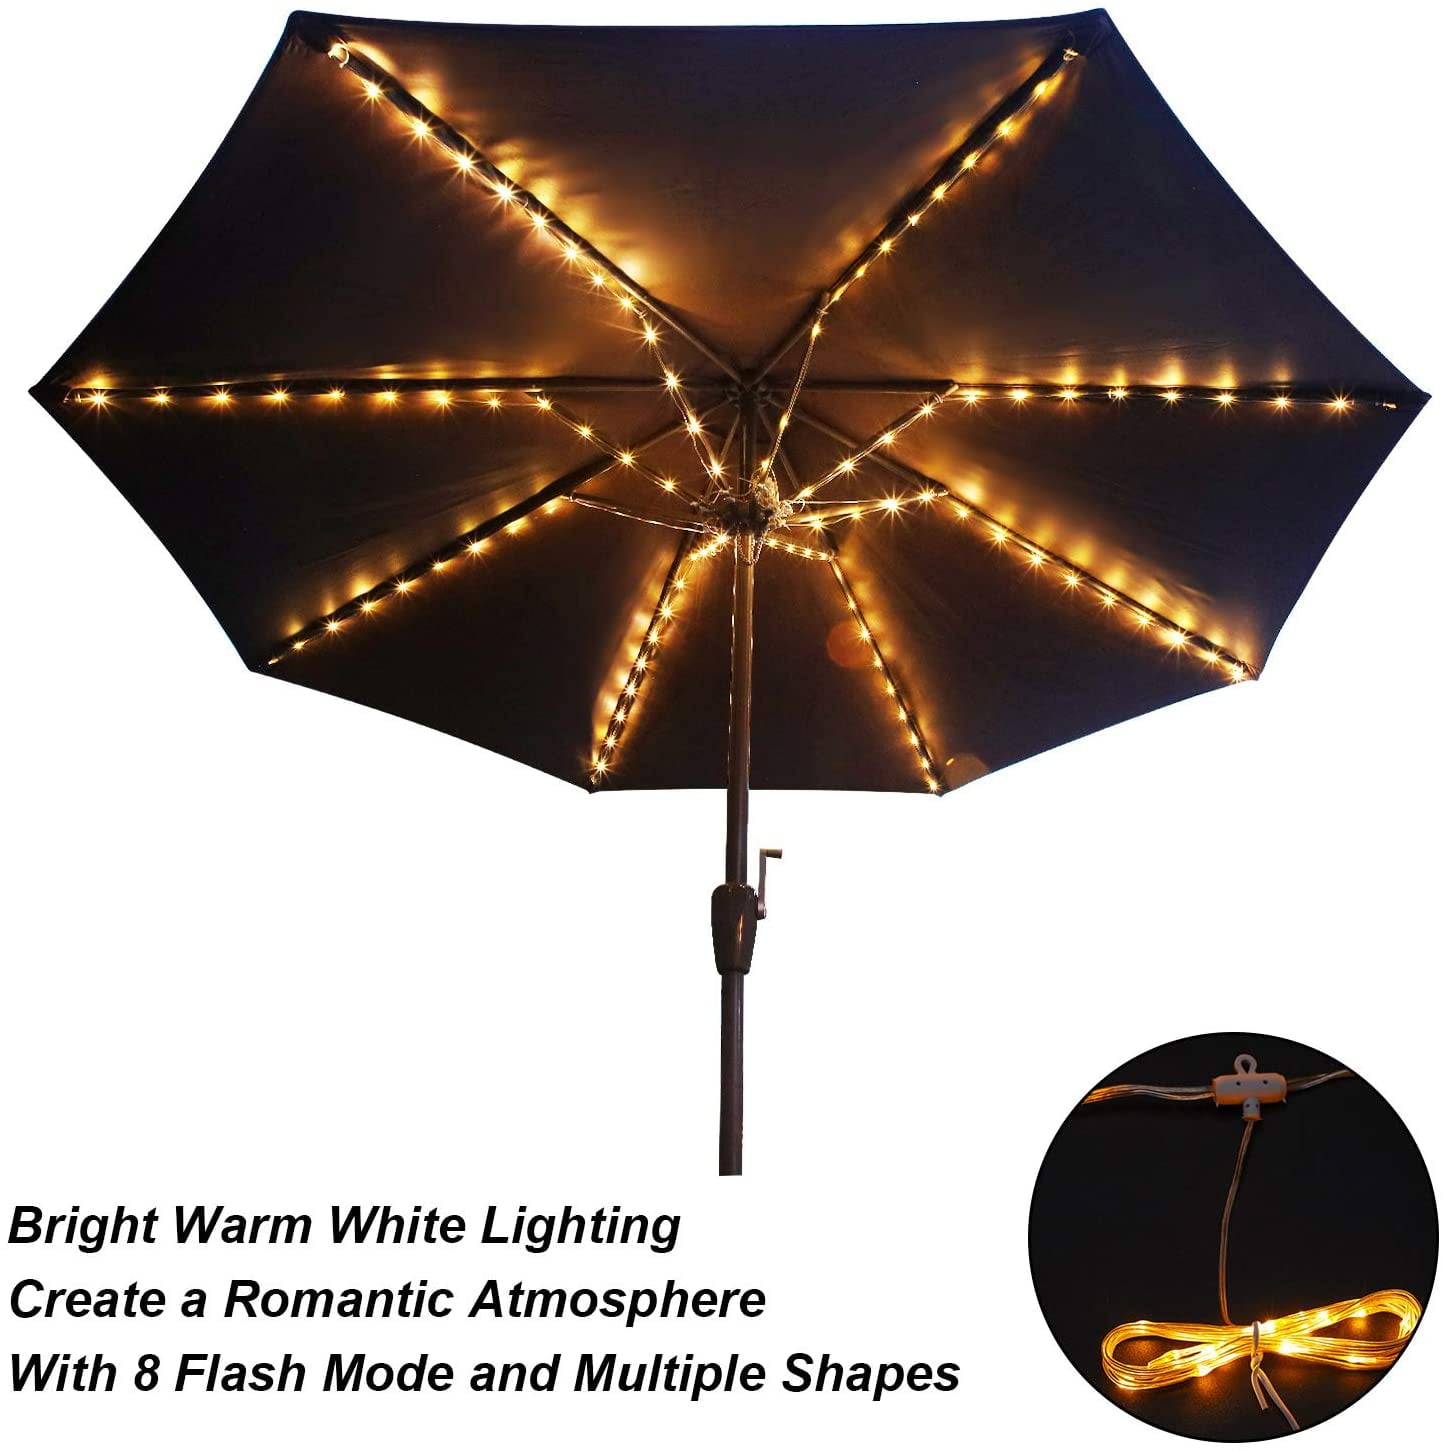 Patio Umbrella Lights 8 Lighting Mode 104 LED String Lights with Remote Control 